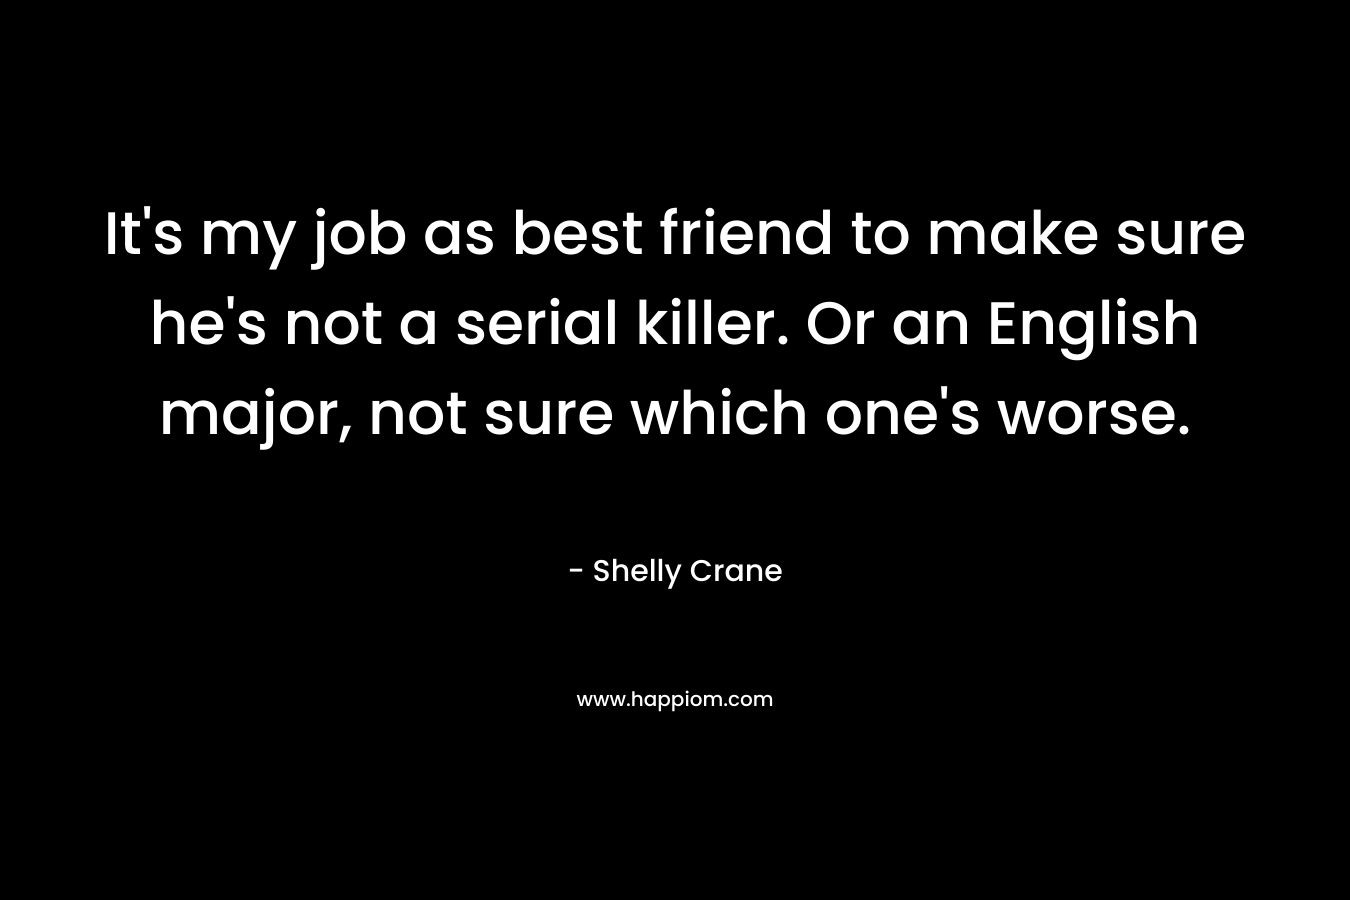 It’s my job as best friend to make sure he’s not a serial killer. Or an English major, not sure which one’s worse. – Shelly Crane